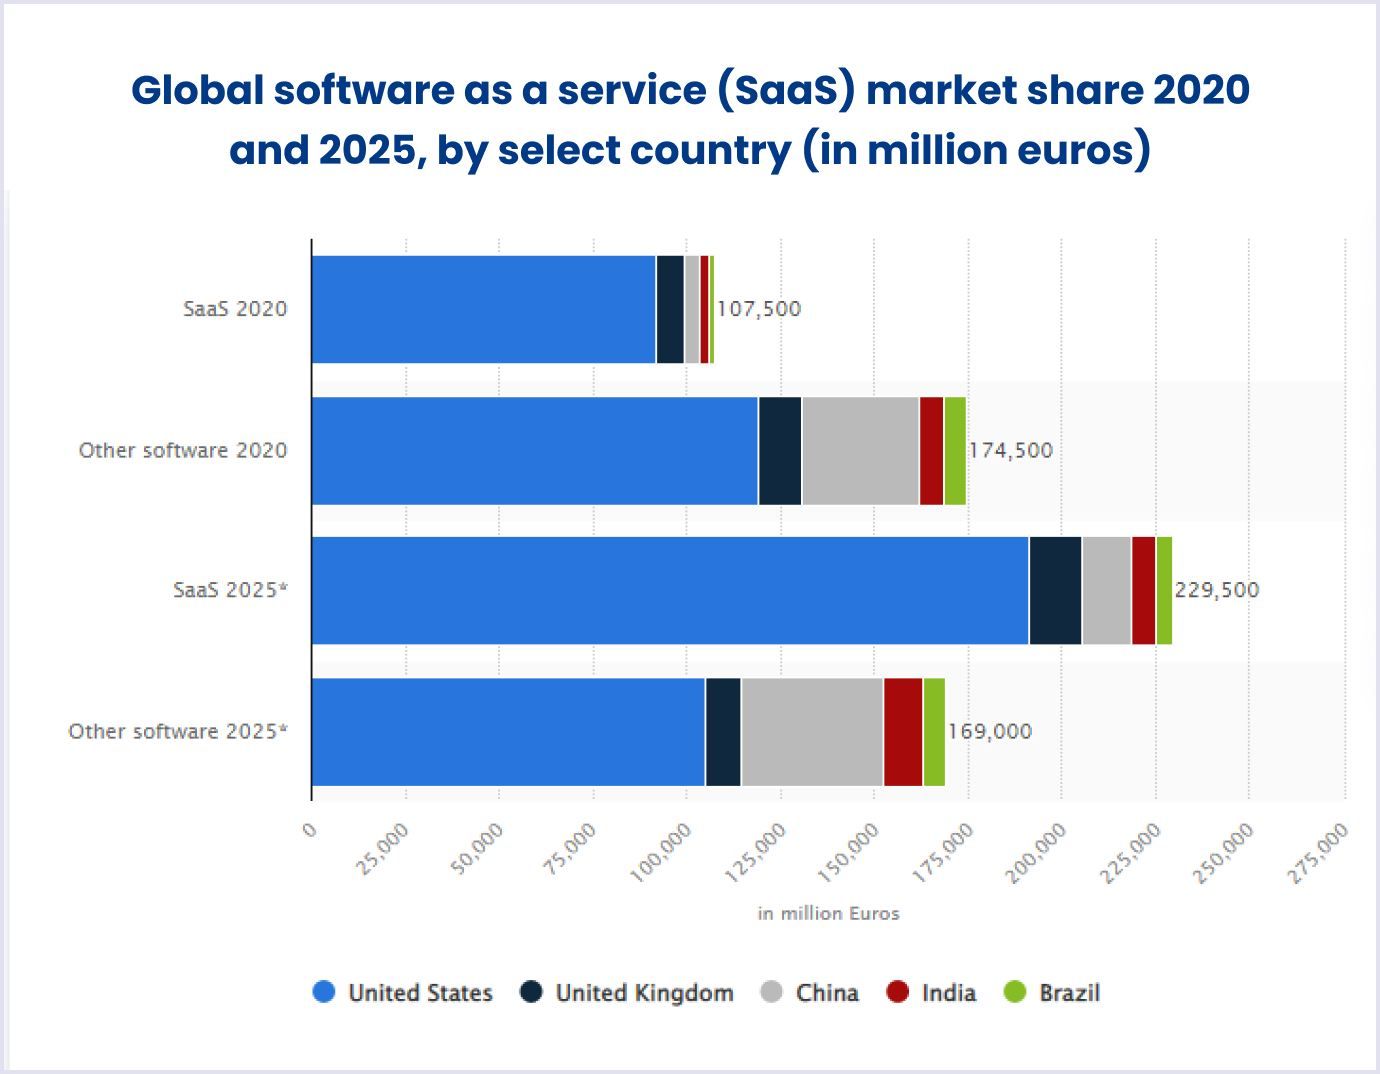 Global SaaS market share in 2020 and 2025 by Statista